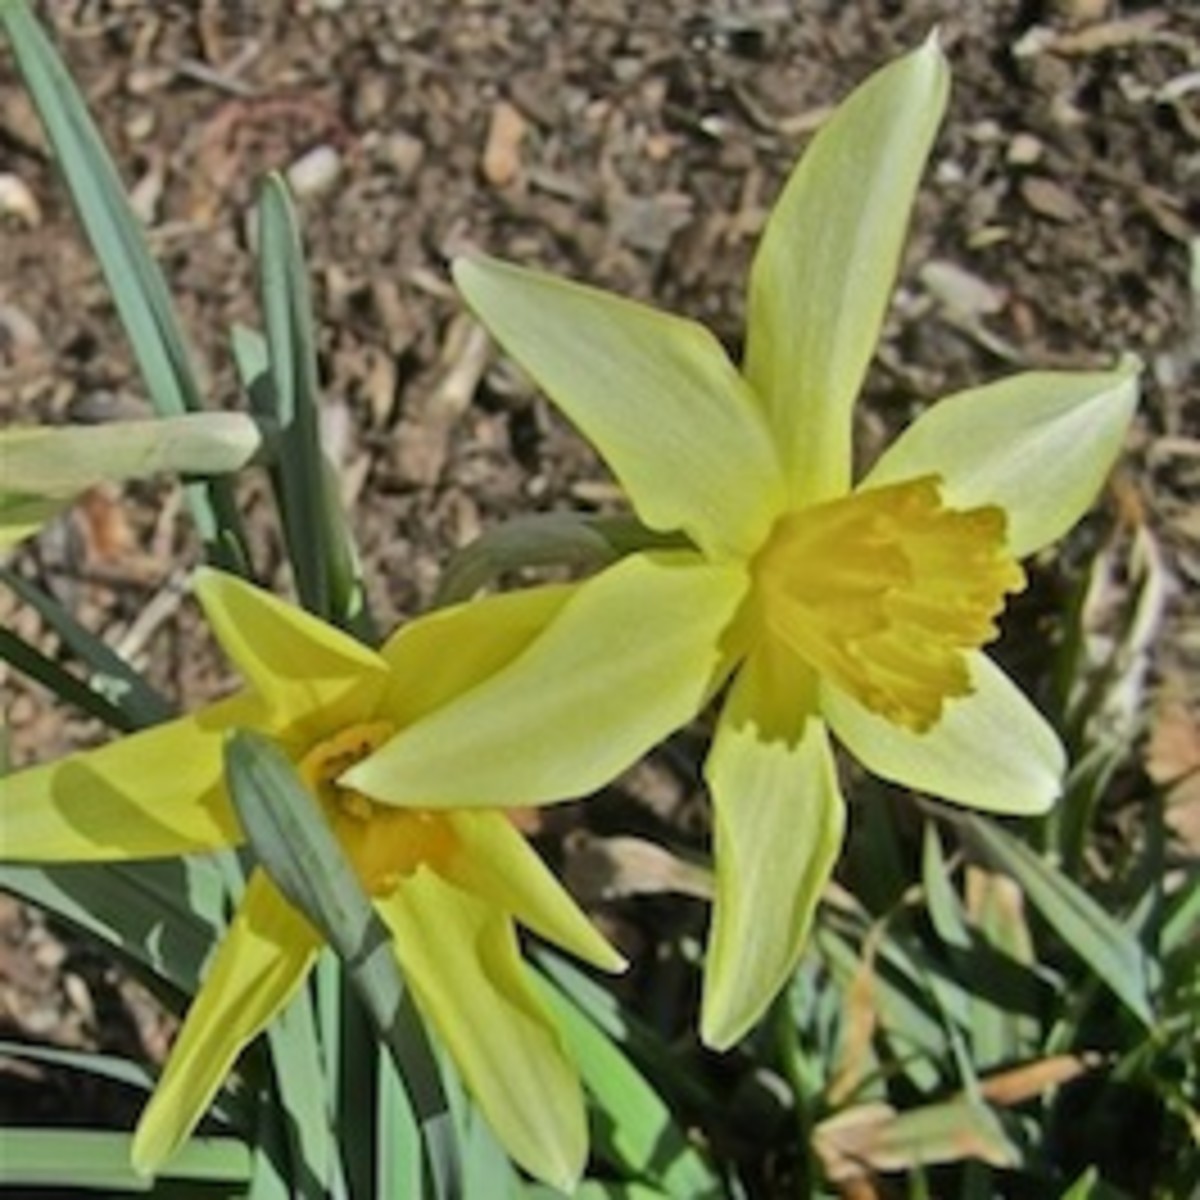 Narcissus "Stella" from 1869